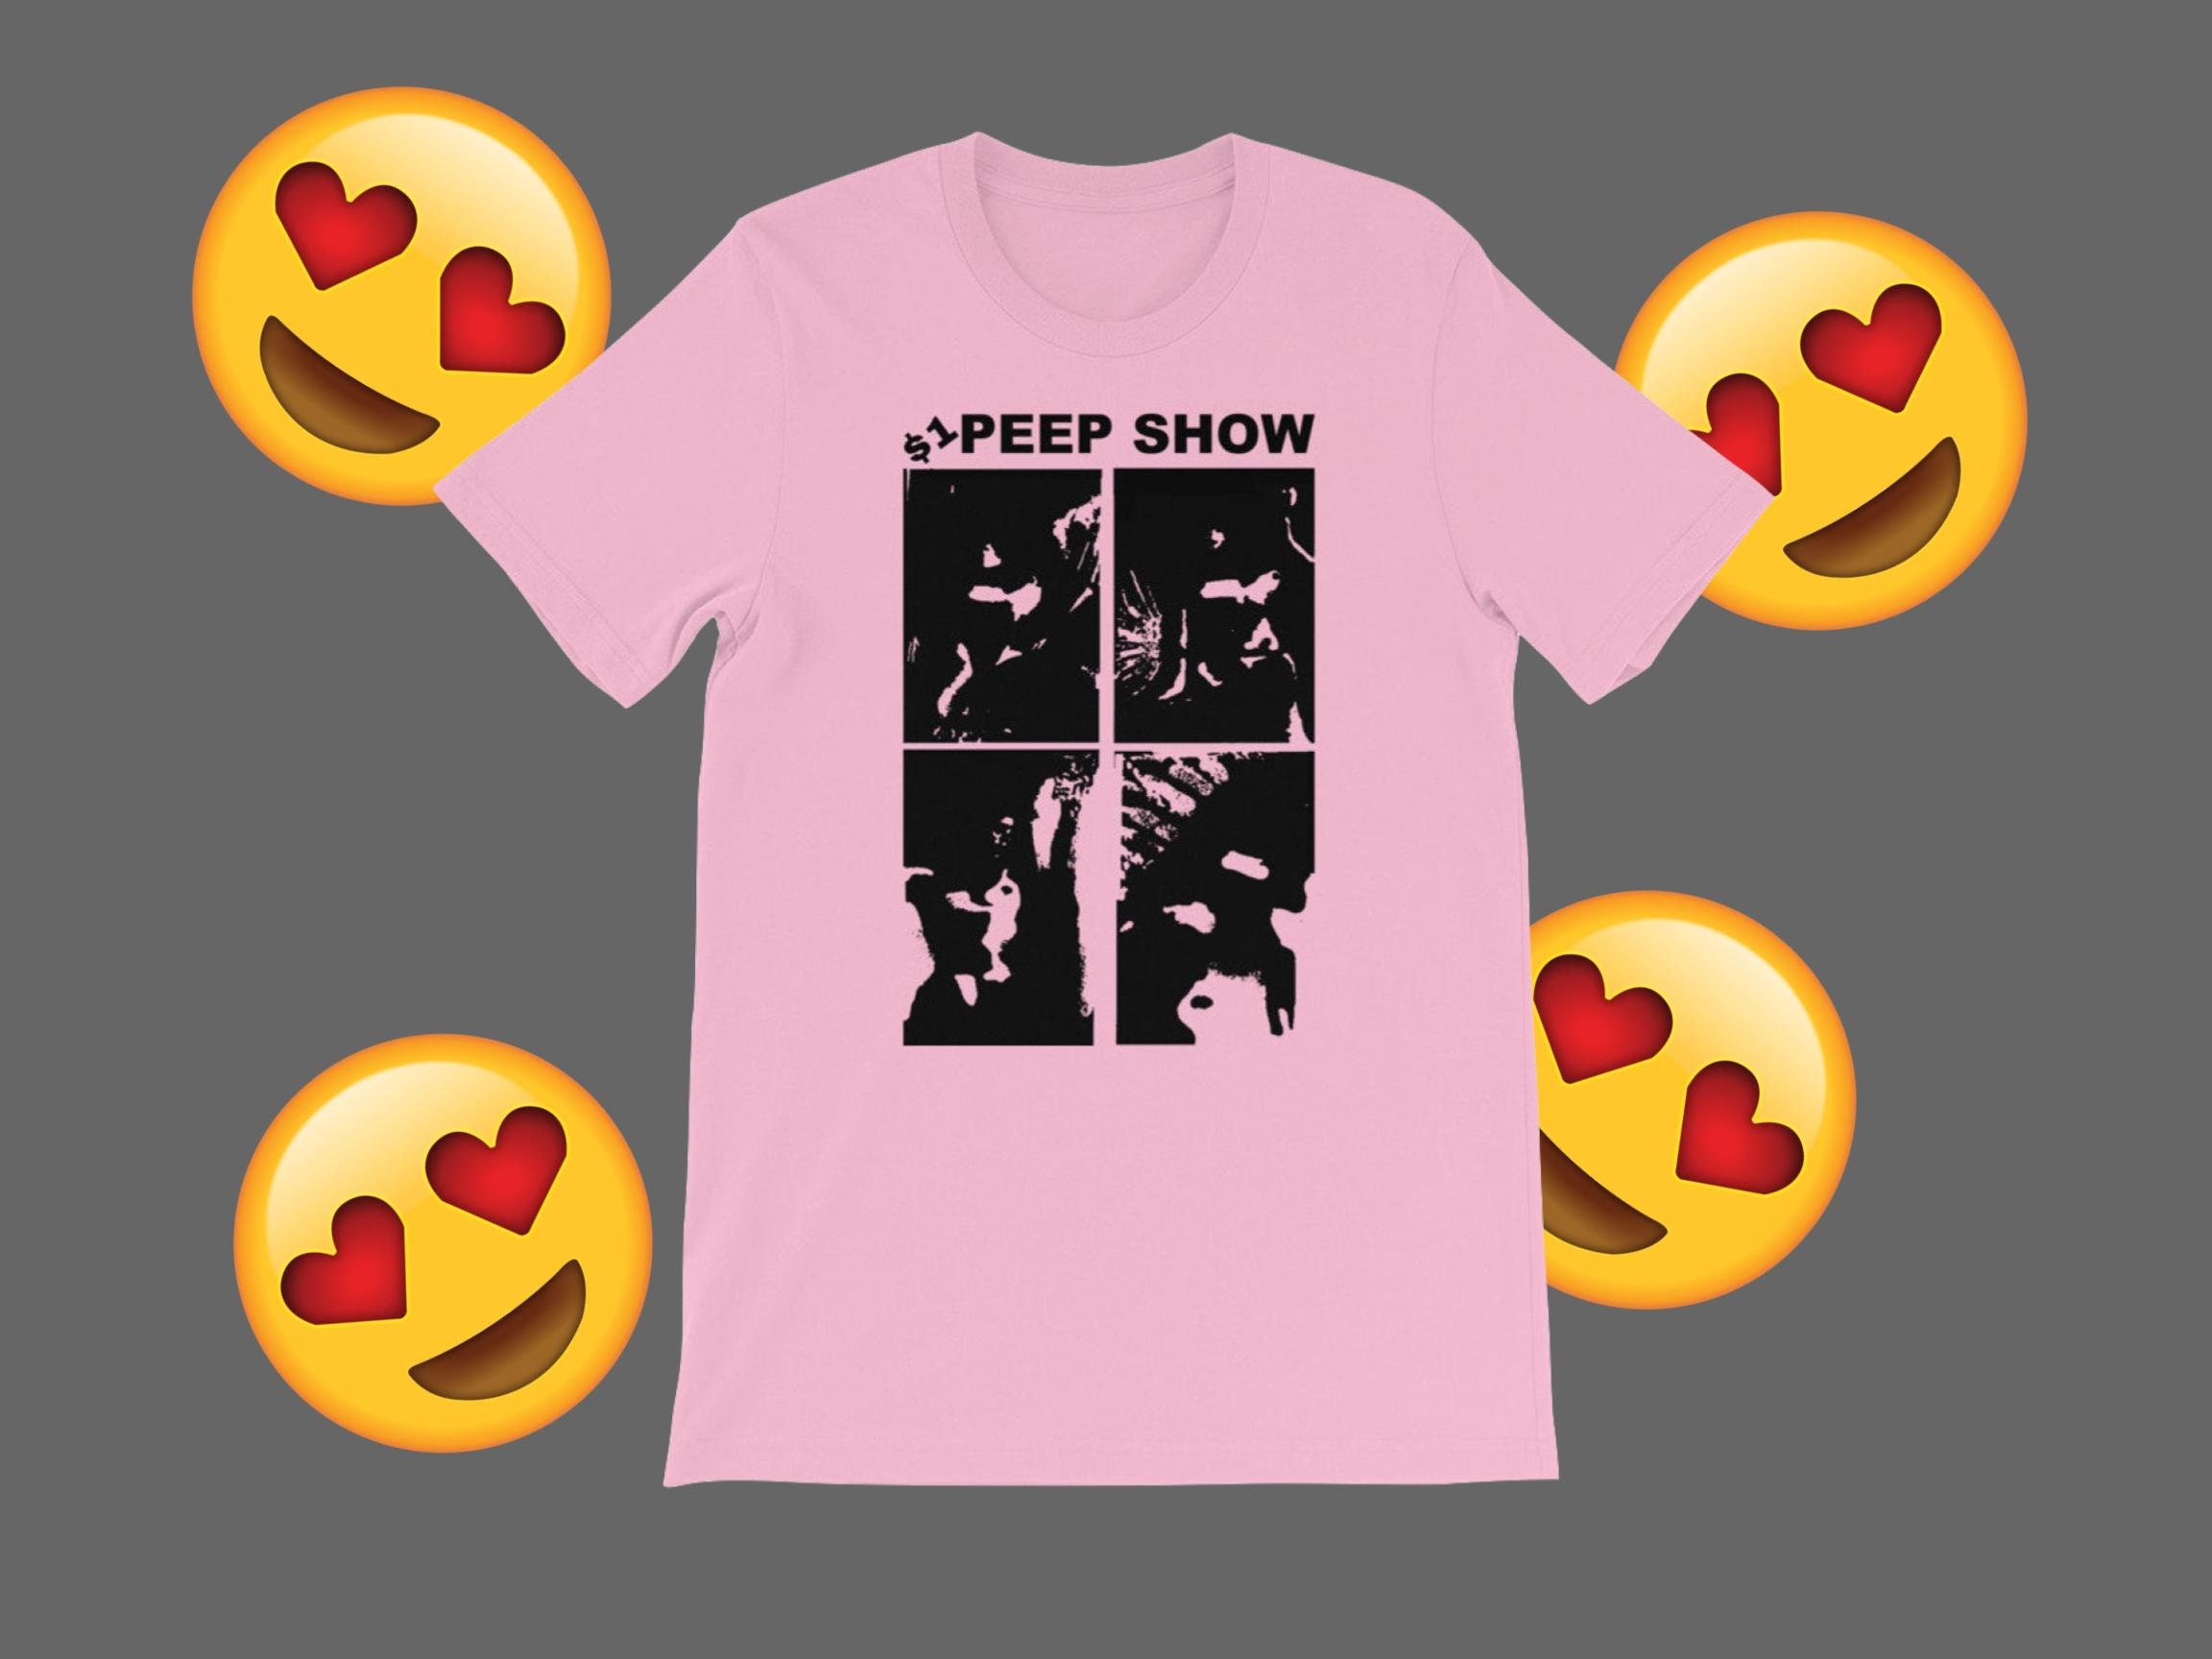 Discover 1 Dollar Peep Show - Lil Peep Style T-Shirt